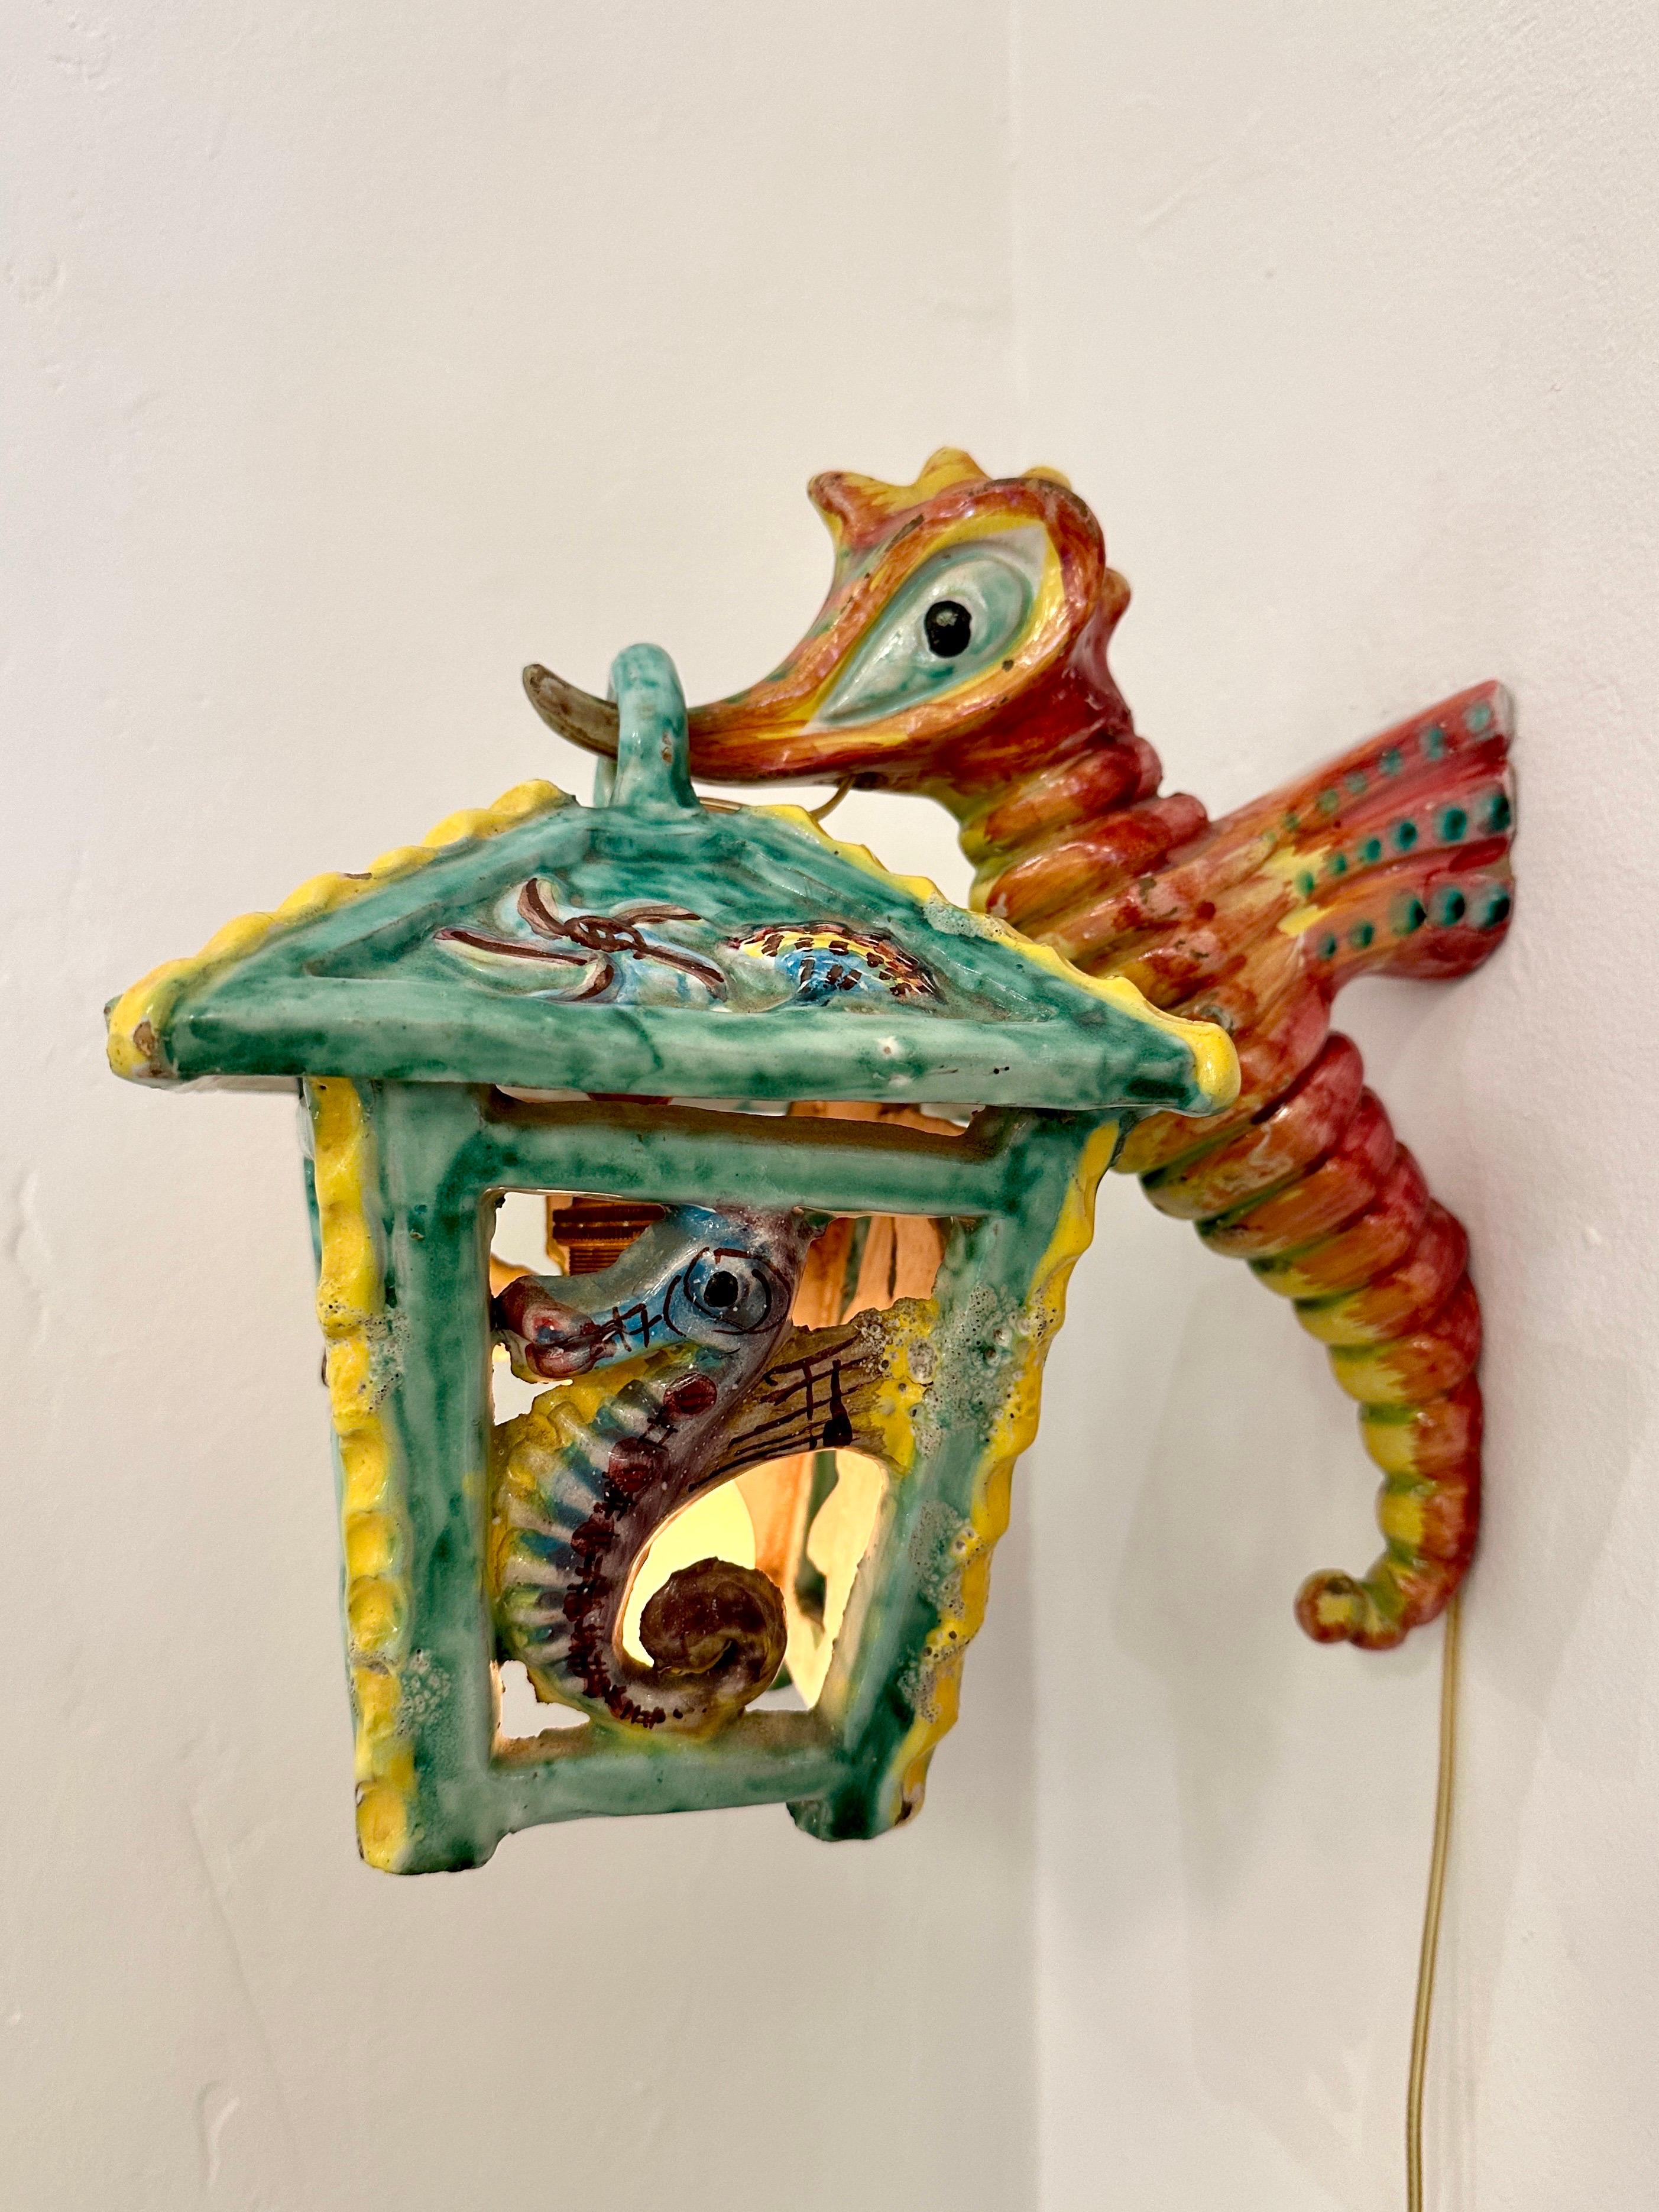 This truly magical Italian sea life maiolica wall mounted lantern depicts relief of sea creatures and vivid colors. One single bulb provides ample illumination - this can be used as shown, wall mounted OR if you prefer to hang it as a lantern from